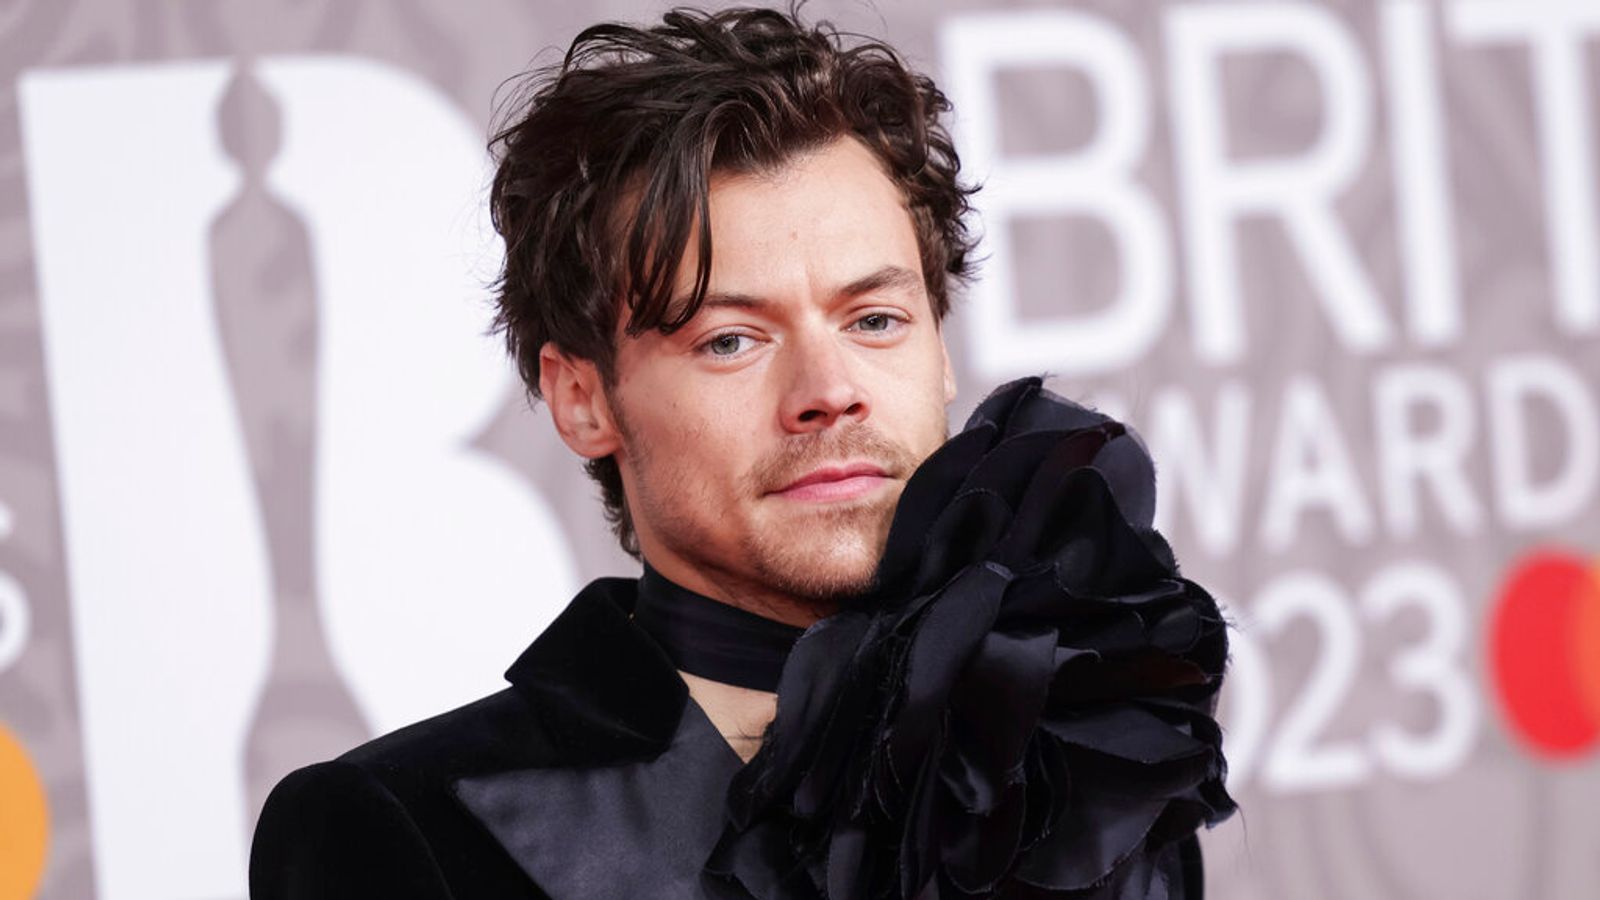 Harry Styles' stalker jailed after sending him 8,000 cards in less than a month